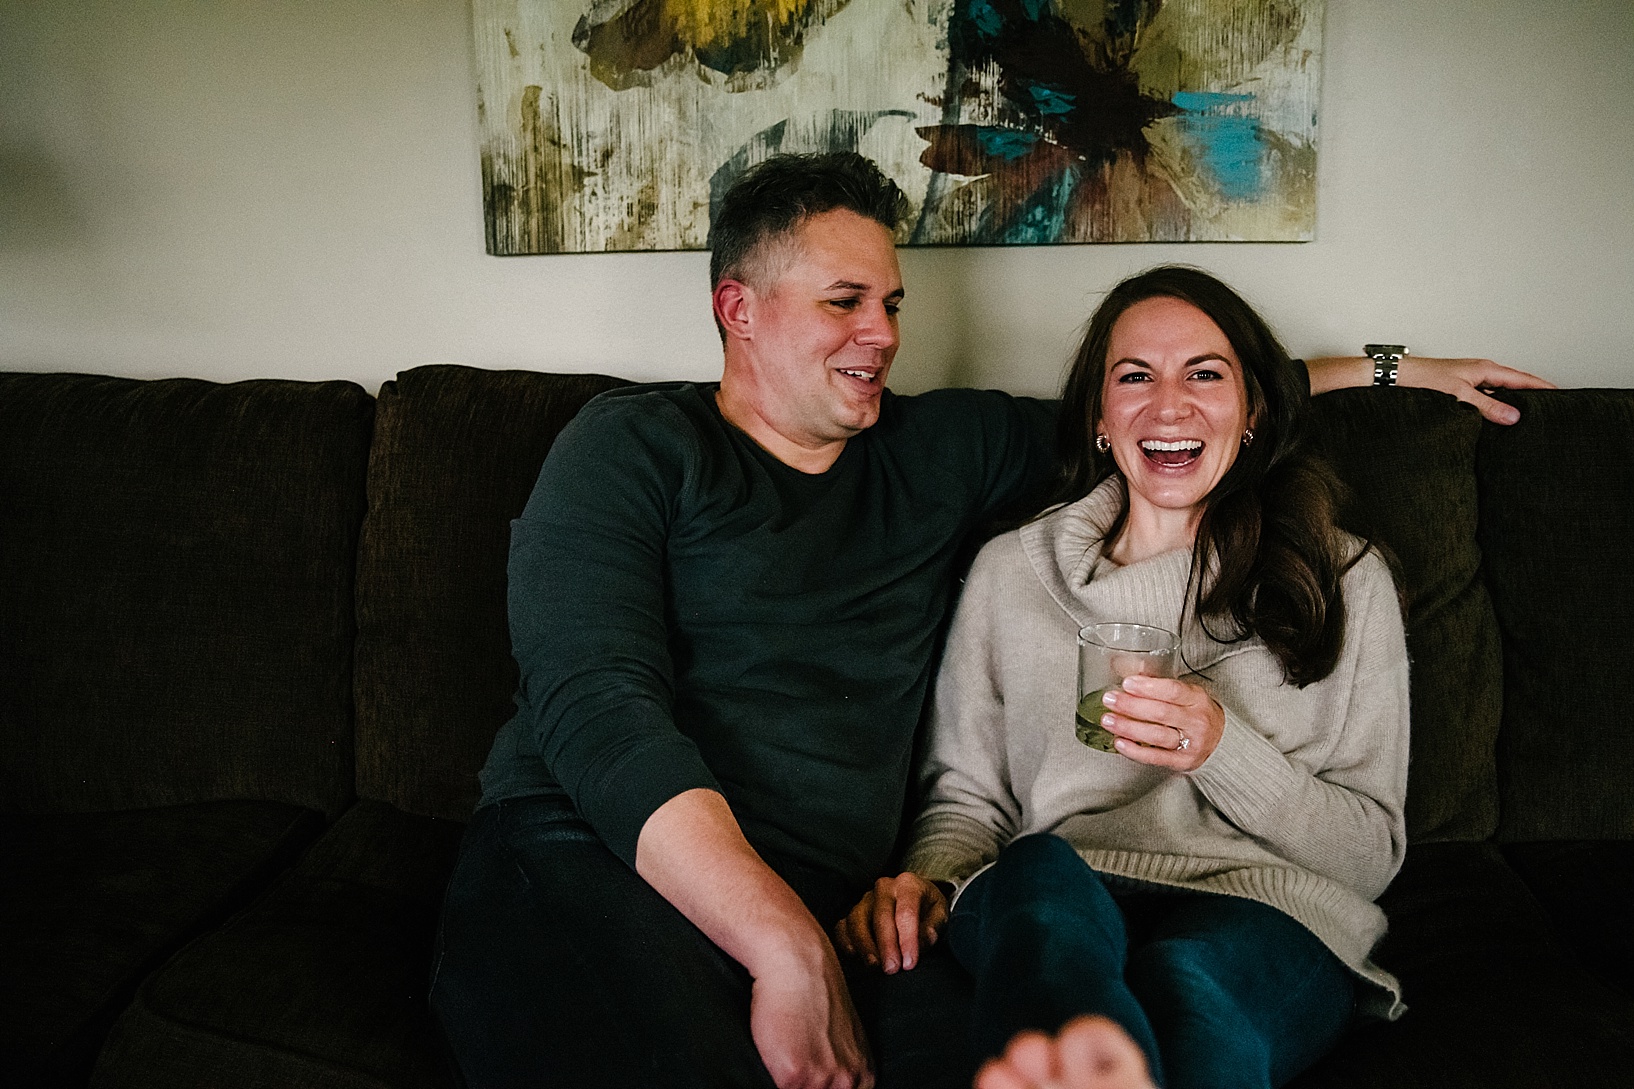 couple sitting on couch drinking cocktail and laughing